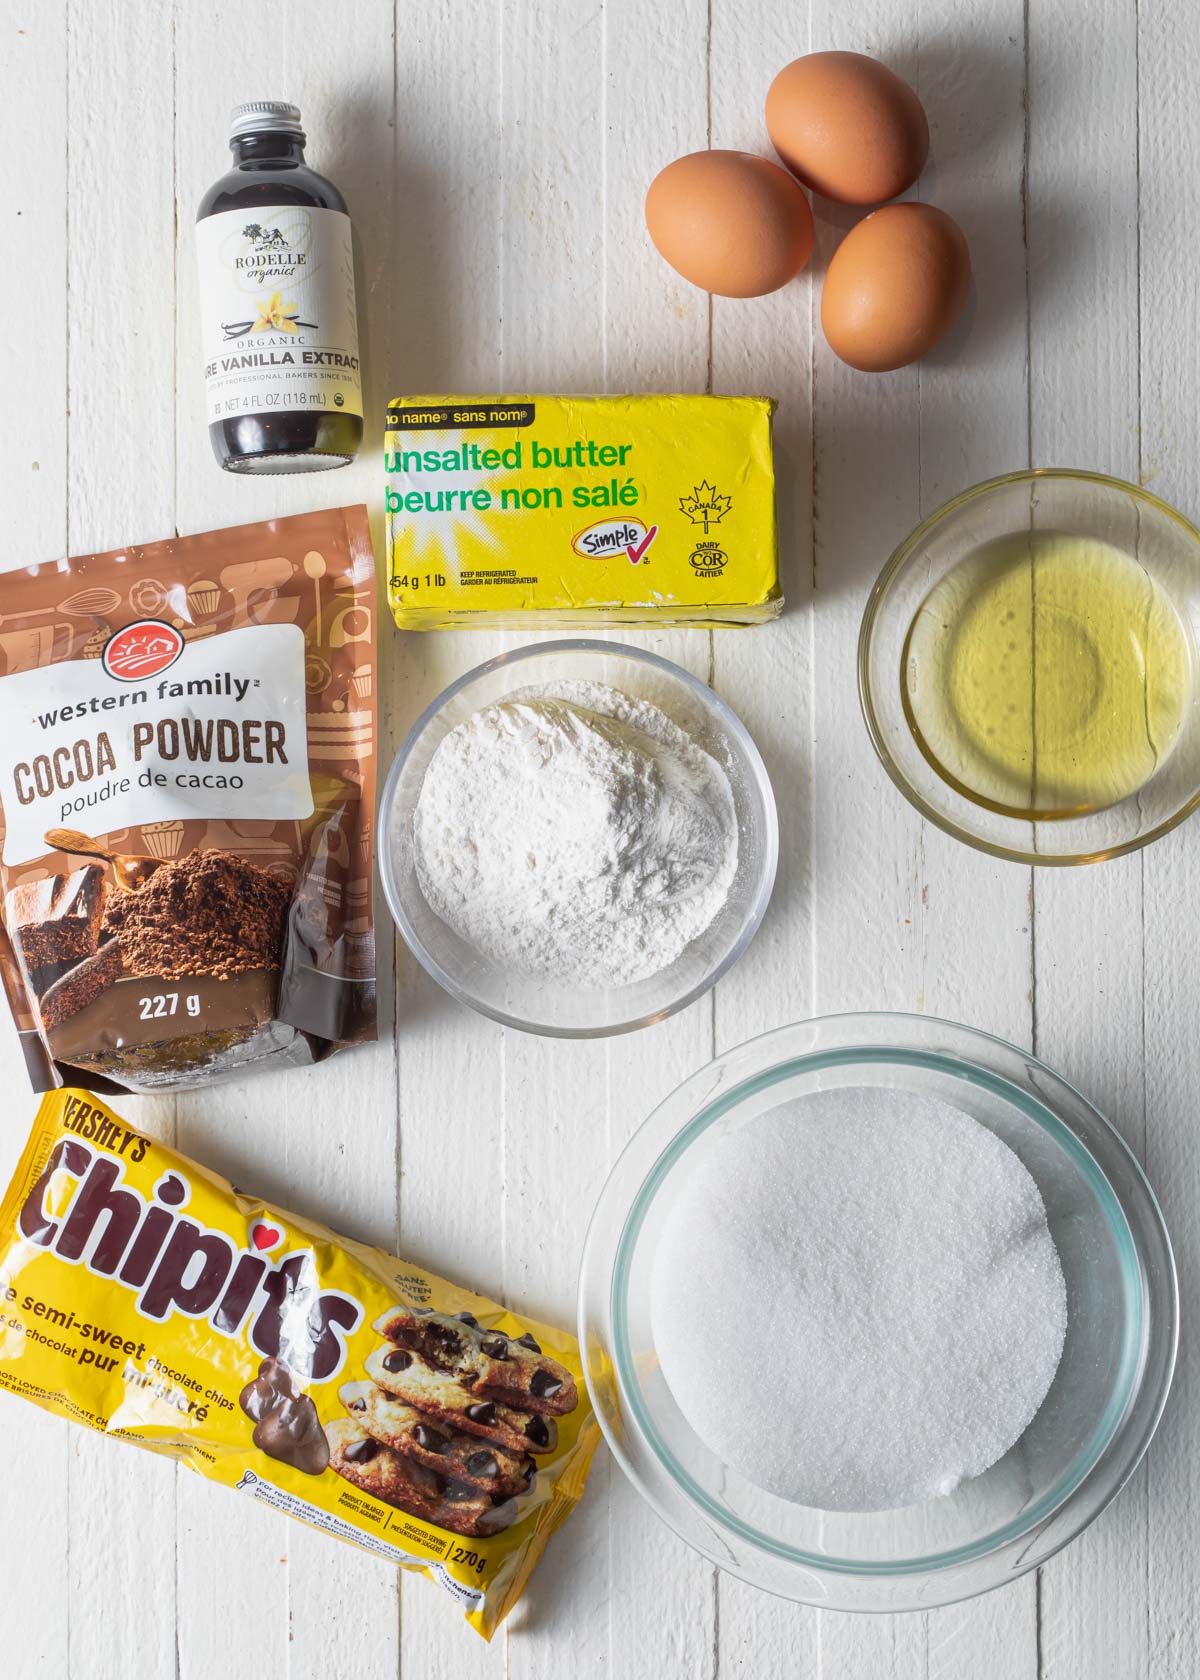 Ingredients needed to bake cocoa powder brownies